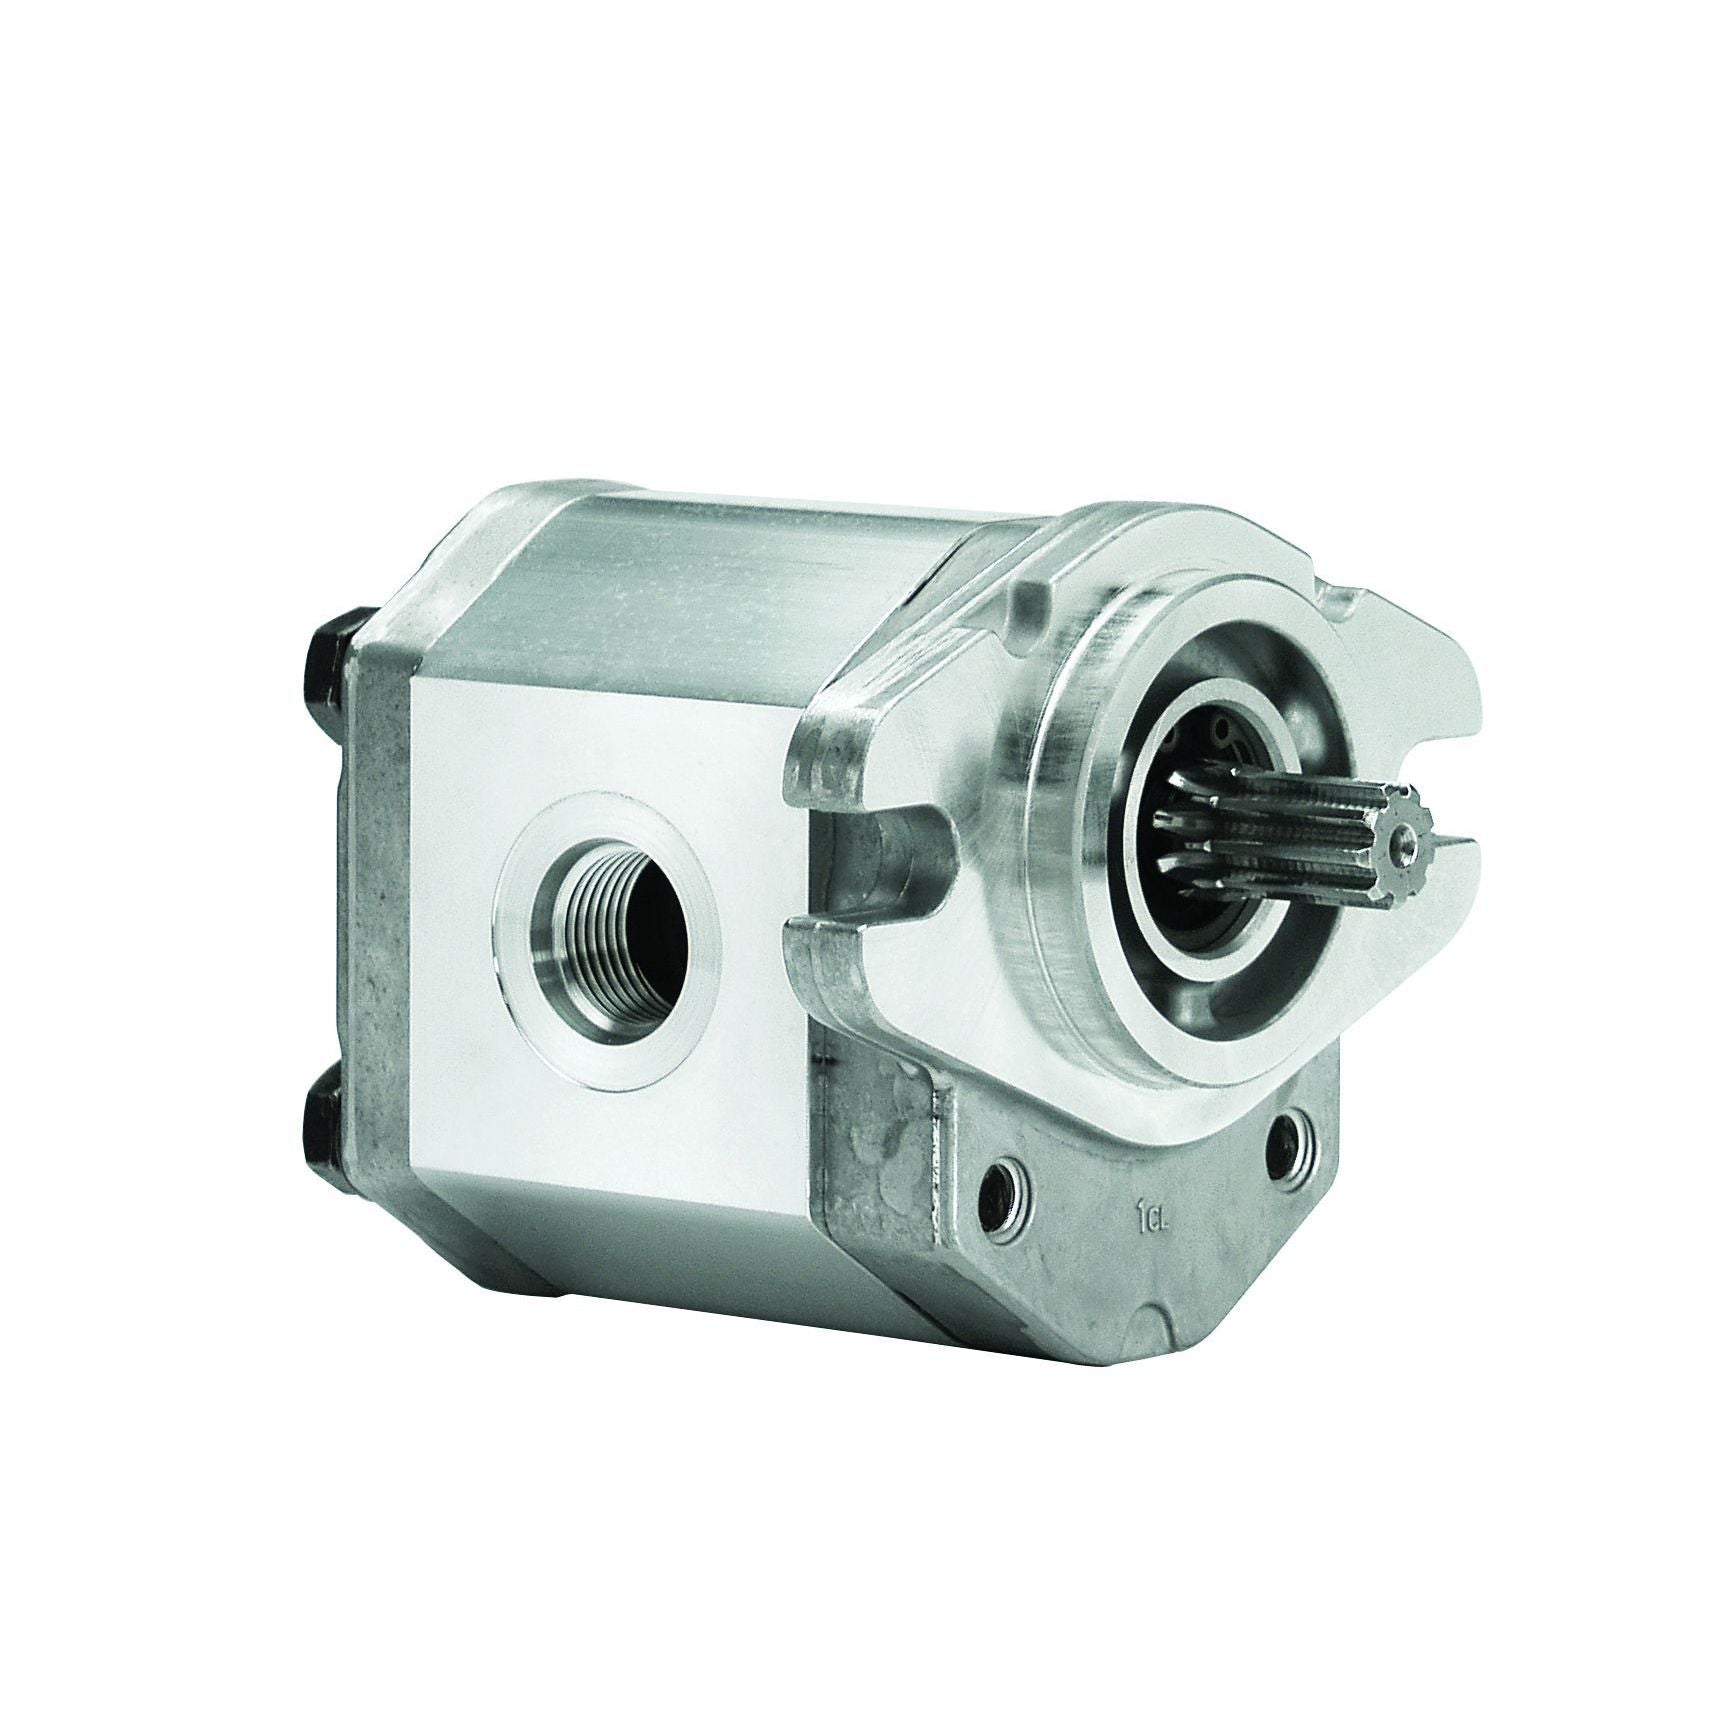 ALP2A-D-37-S1 : Marzocchi Gear Pump, CW, 25.5cc (1.5555in3), 12.12 GPM, 2465psi, 1800 RPM, #12 SAE (3/4") In, #10 SAE (5/8") Out, Splined Shaft 9T 16/32DP, SAE A 2-Bolt Mount